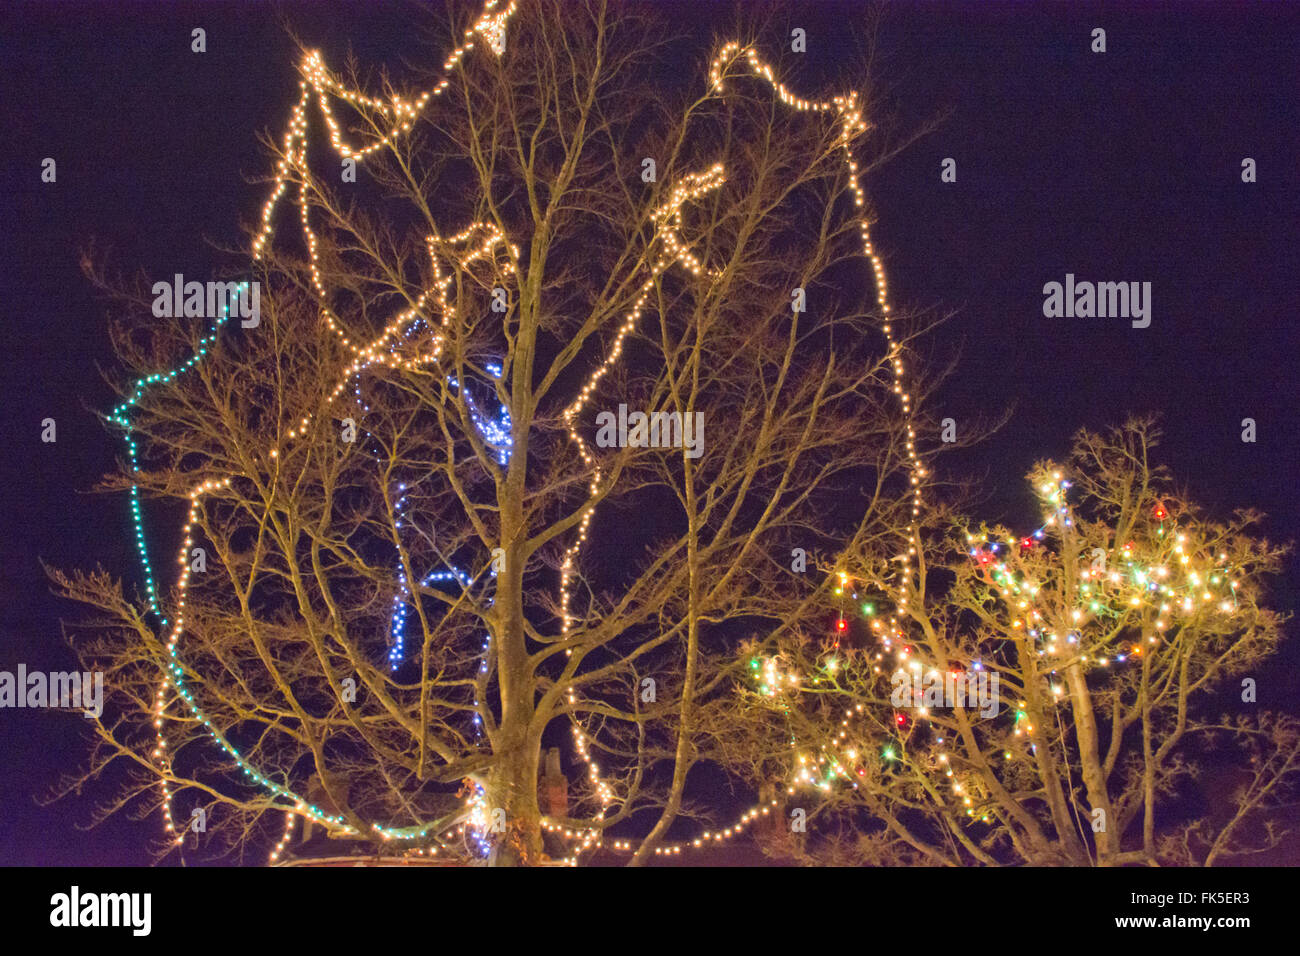 Christmas lights in trees Stock Photo